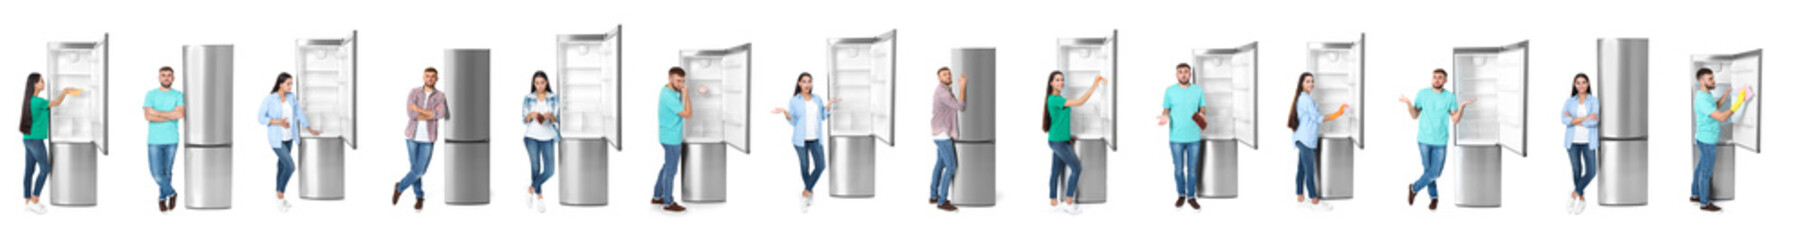 Young man near open refrigerator on white background